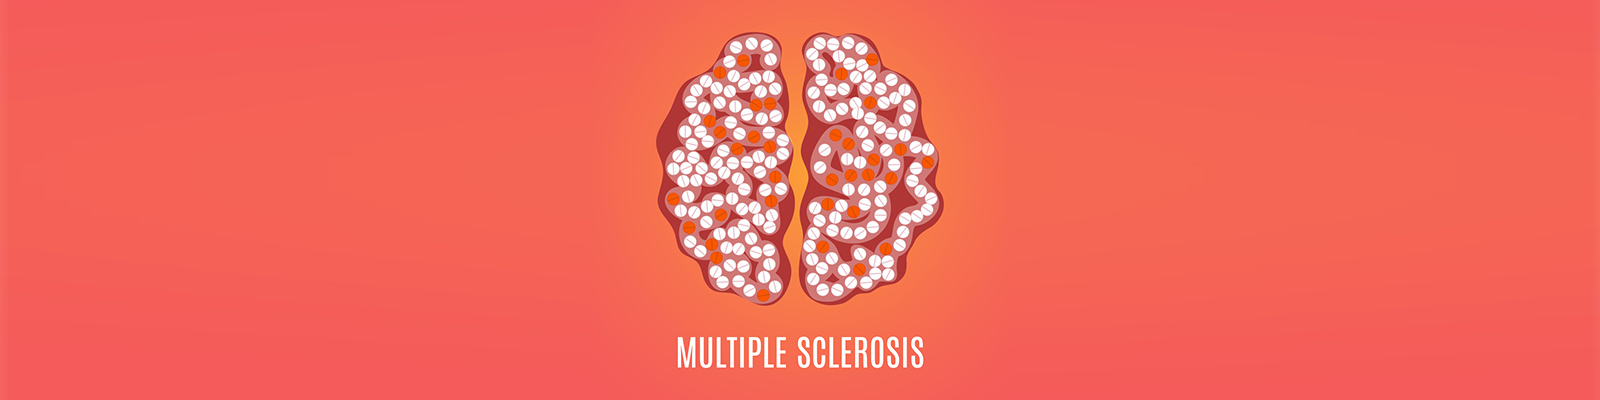 Living with MS? Take Our Multiple Sclerosis Quiz Today